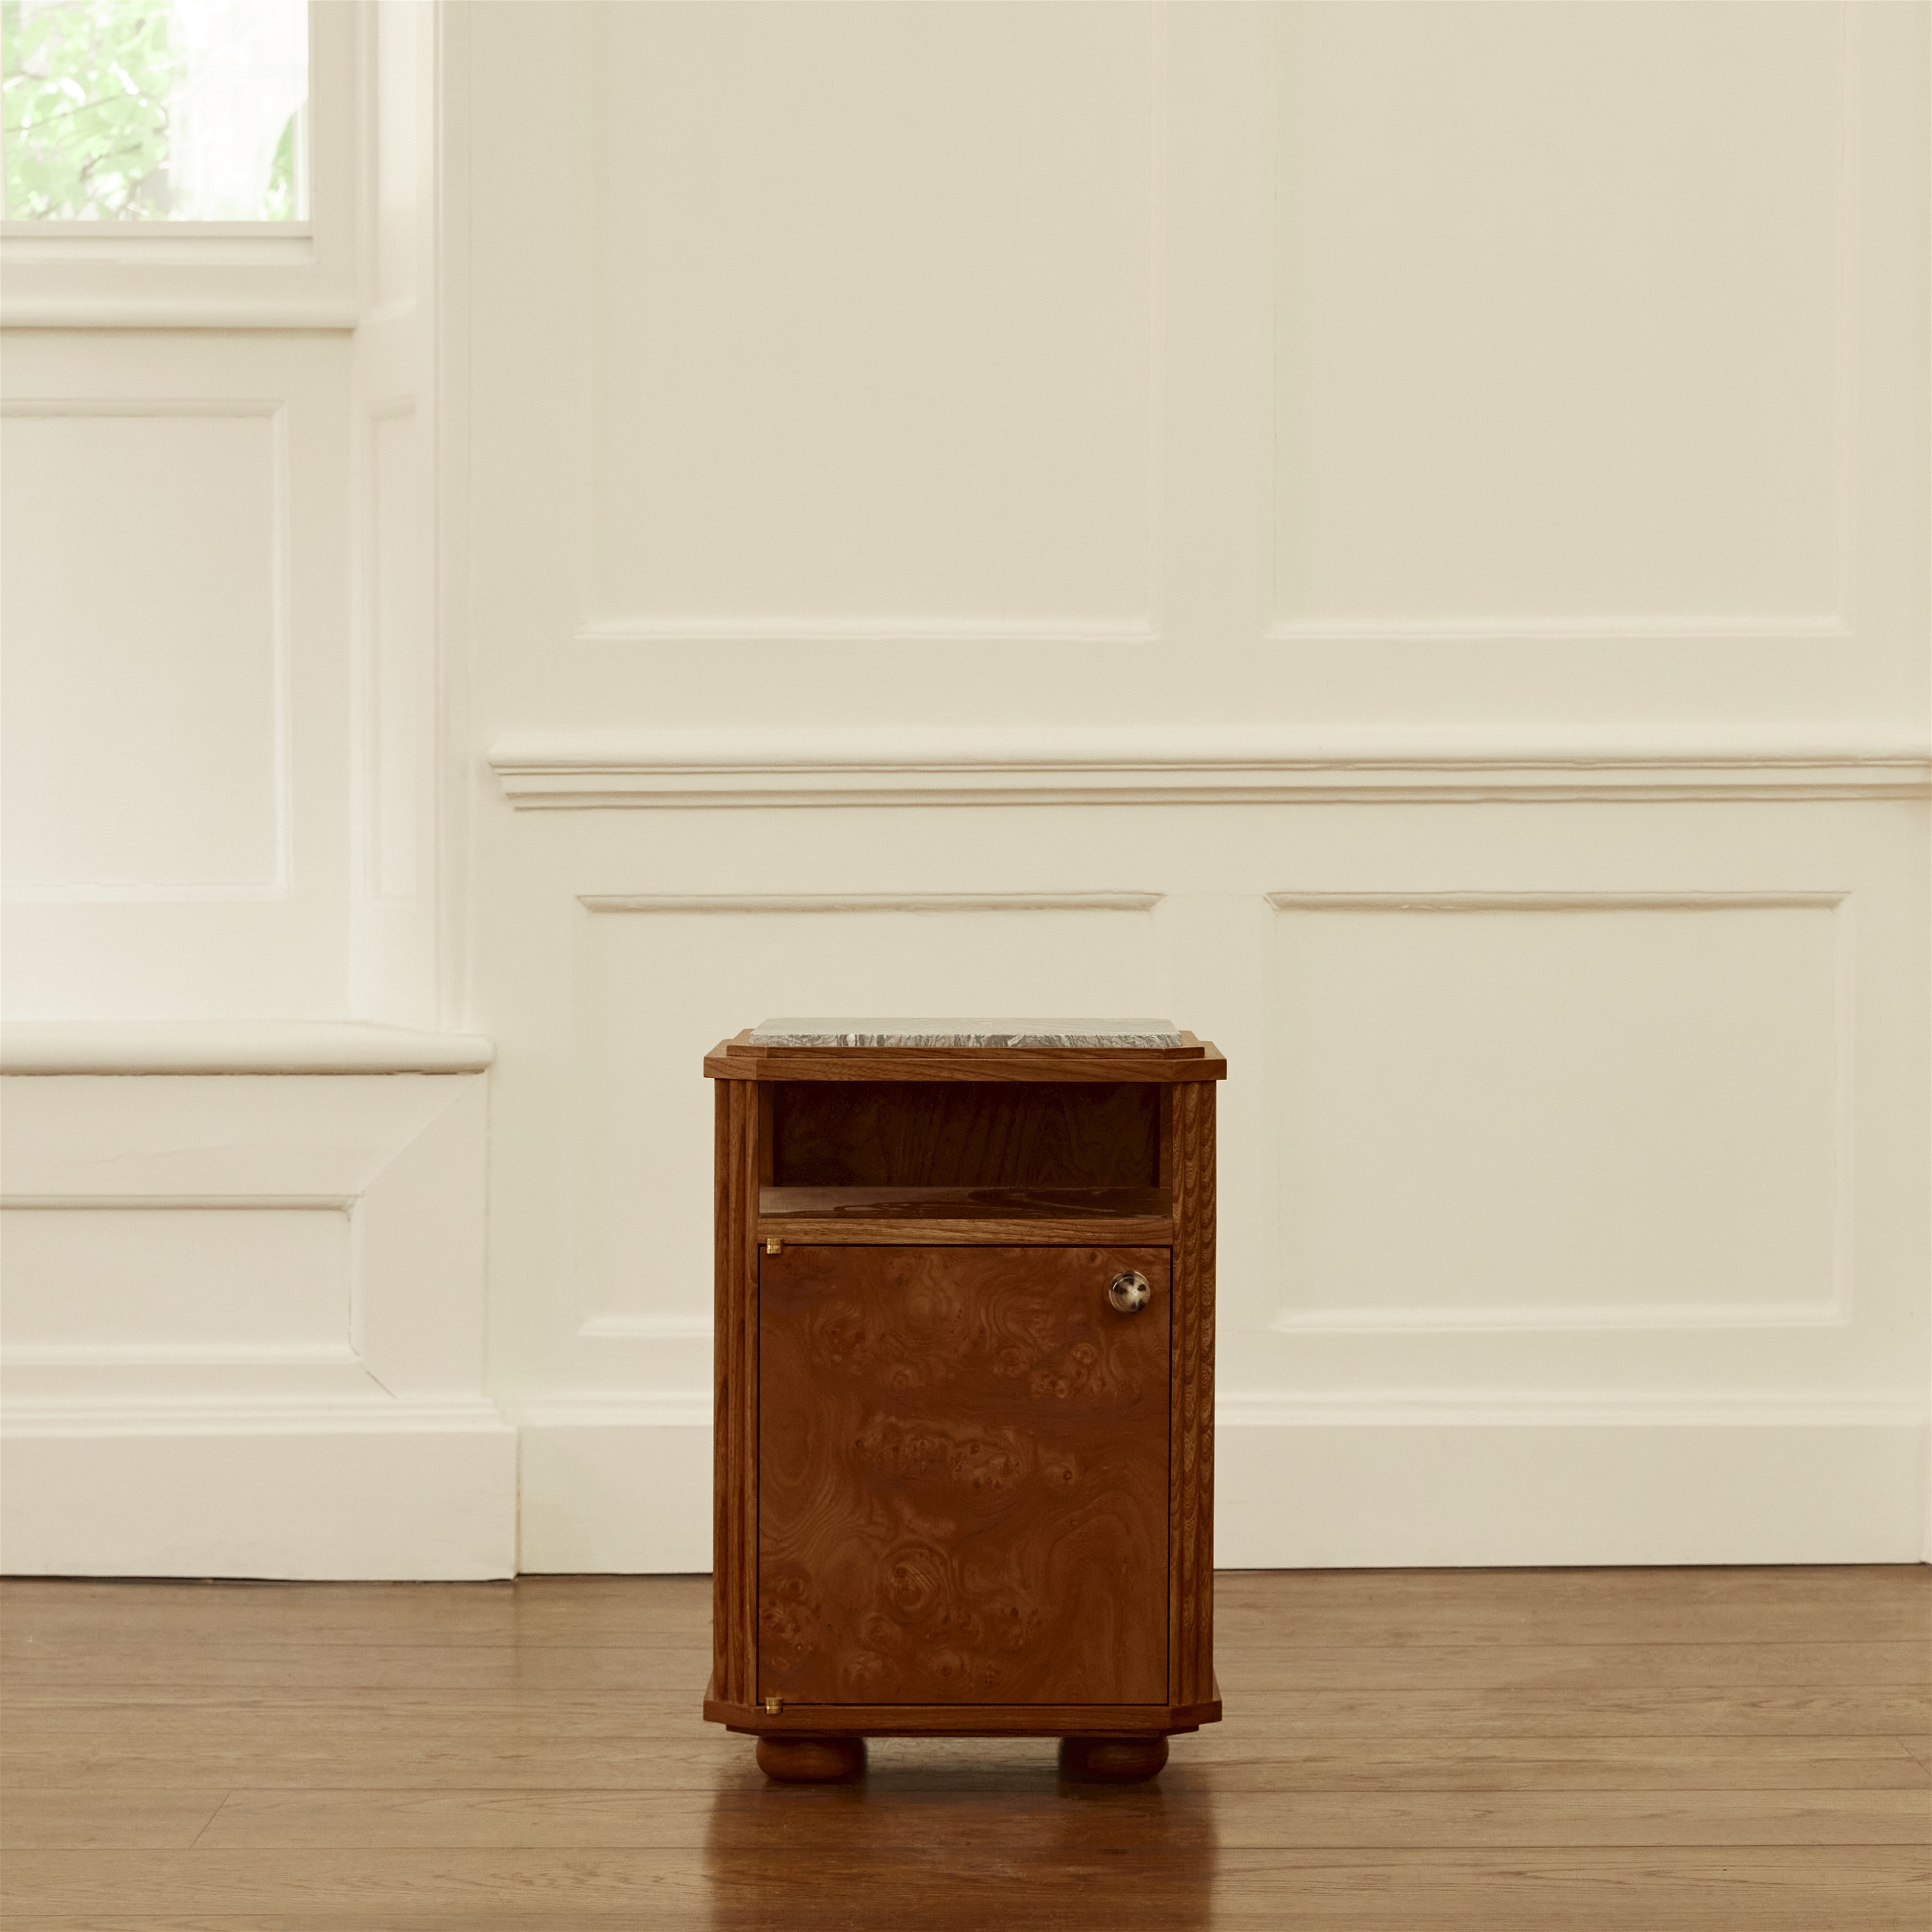 a small wooden cabinet sitting on top of a hard wood floor